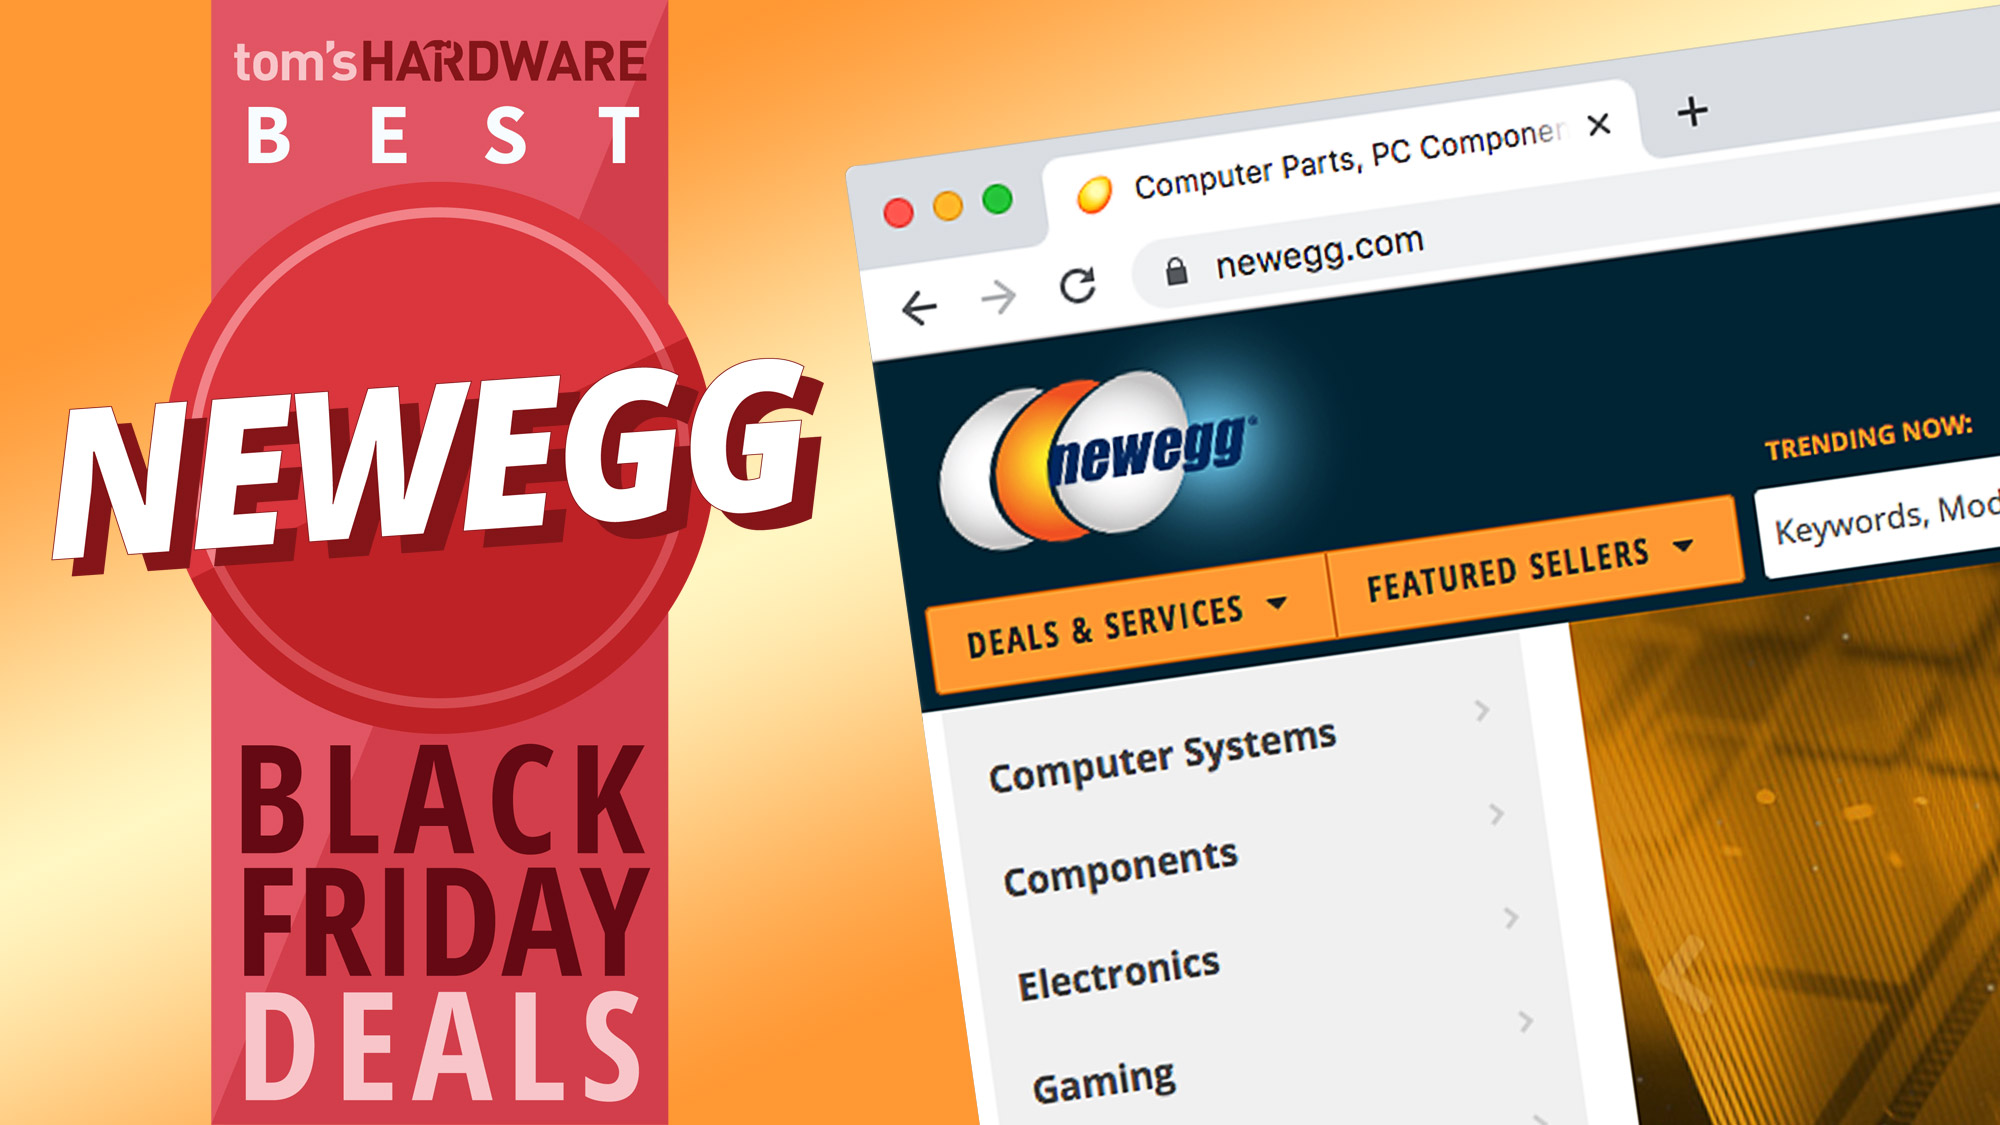 Best Newegg Black Friday Deals 2019 Hardware Pcs And More Images, Photos, Reviews